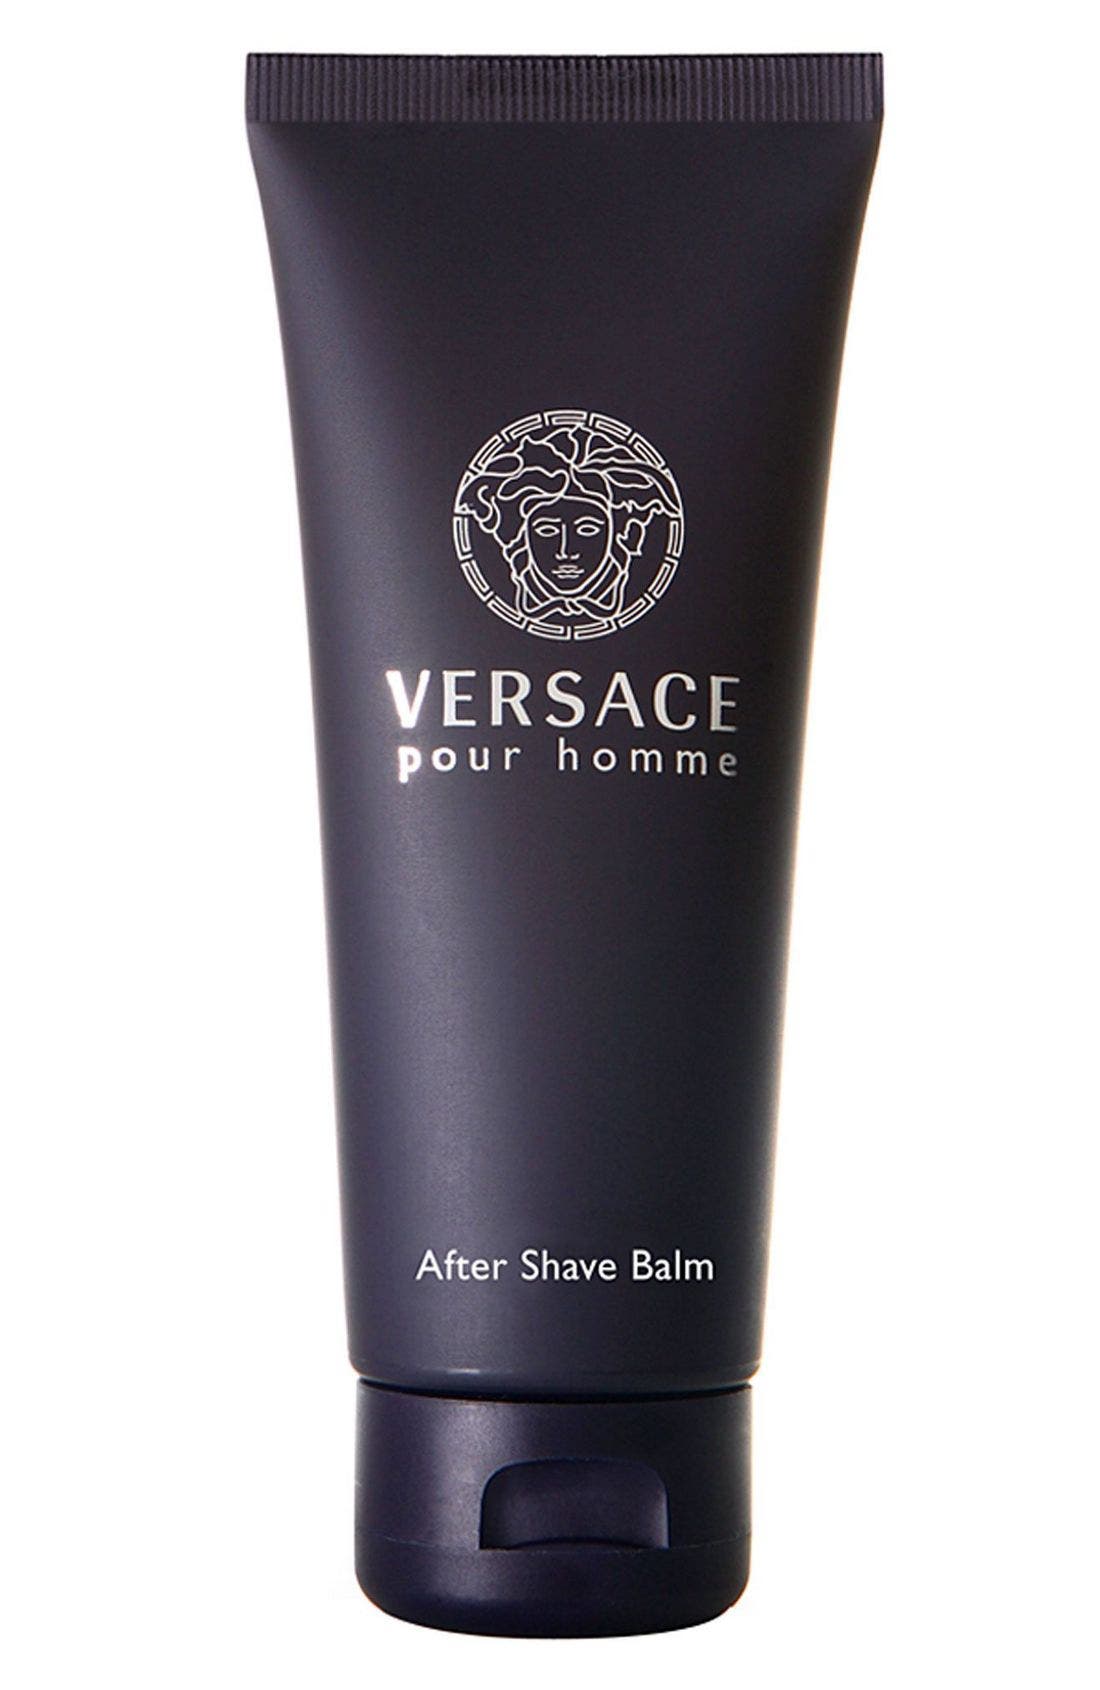 Versace pour Homme After Shave Balm at Nordstrom, Size 3.4 Oz